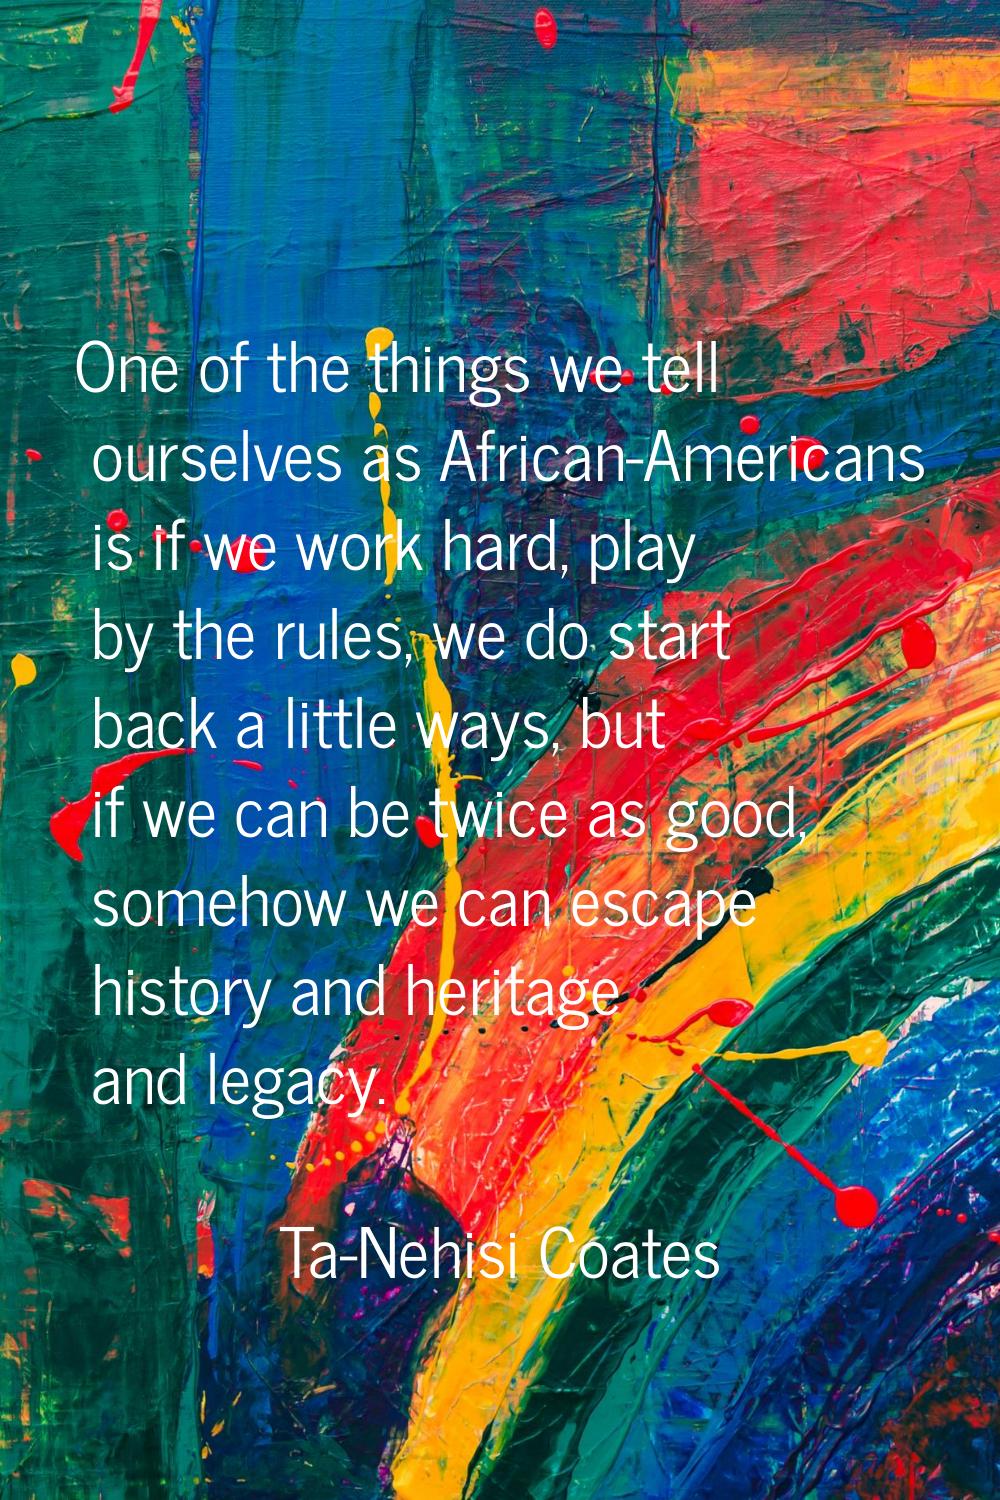 One of the things we tell ourselves as African-Americans is if we work hard, play by the rules, we 